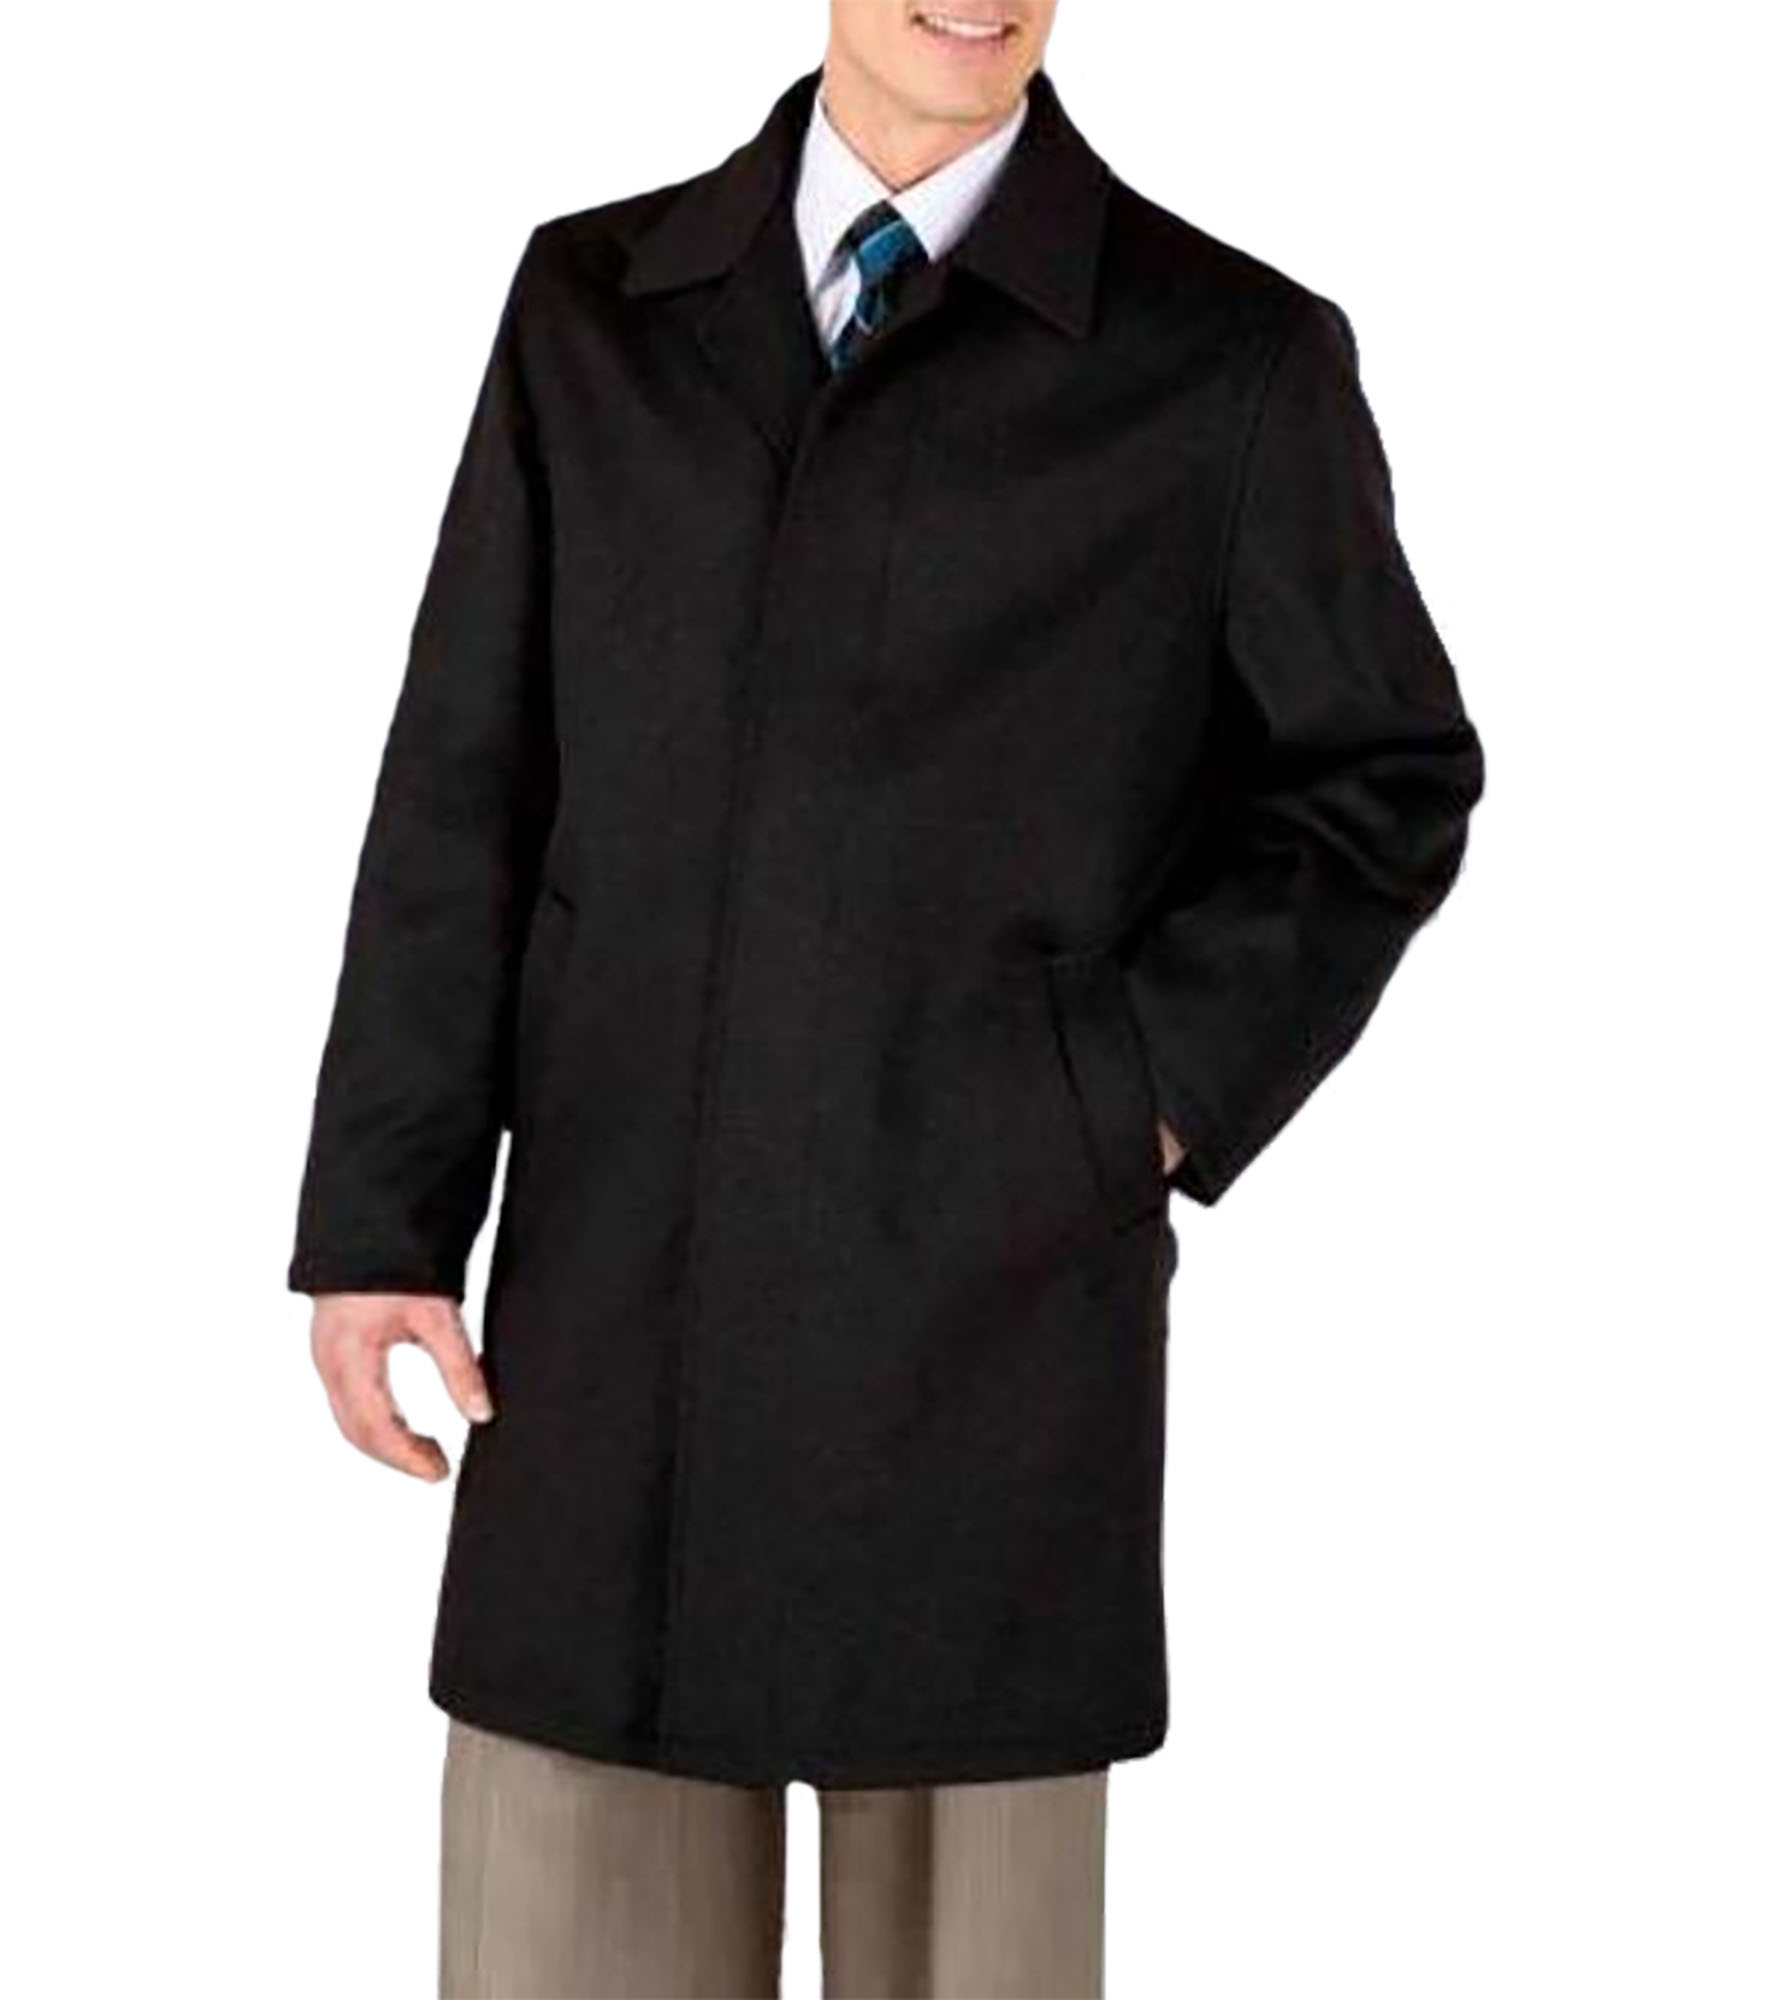 Three Quarters Length Mens Dress Coat 4 Button 3/4 Length Car Coat In Wool & Cashmere Black - image 1 of 1